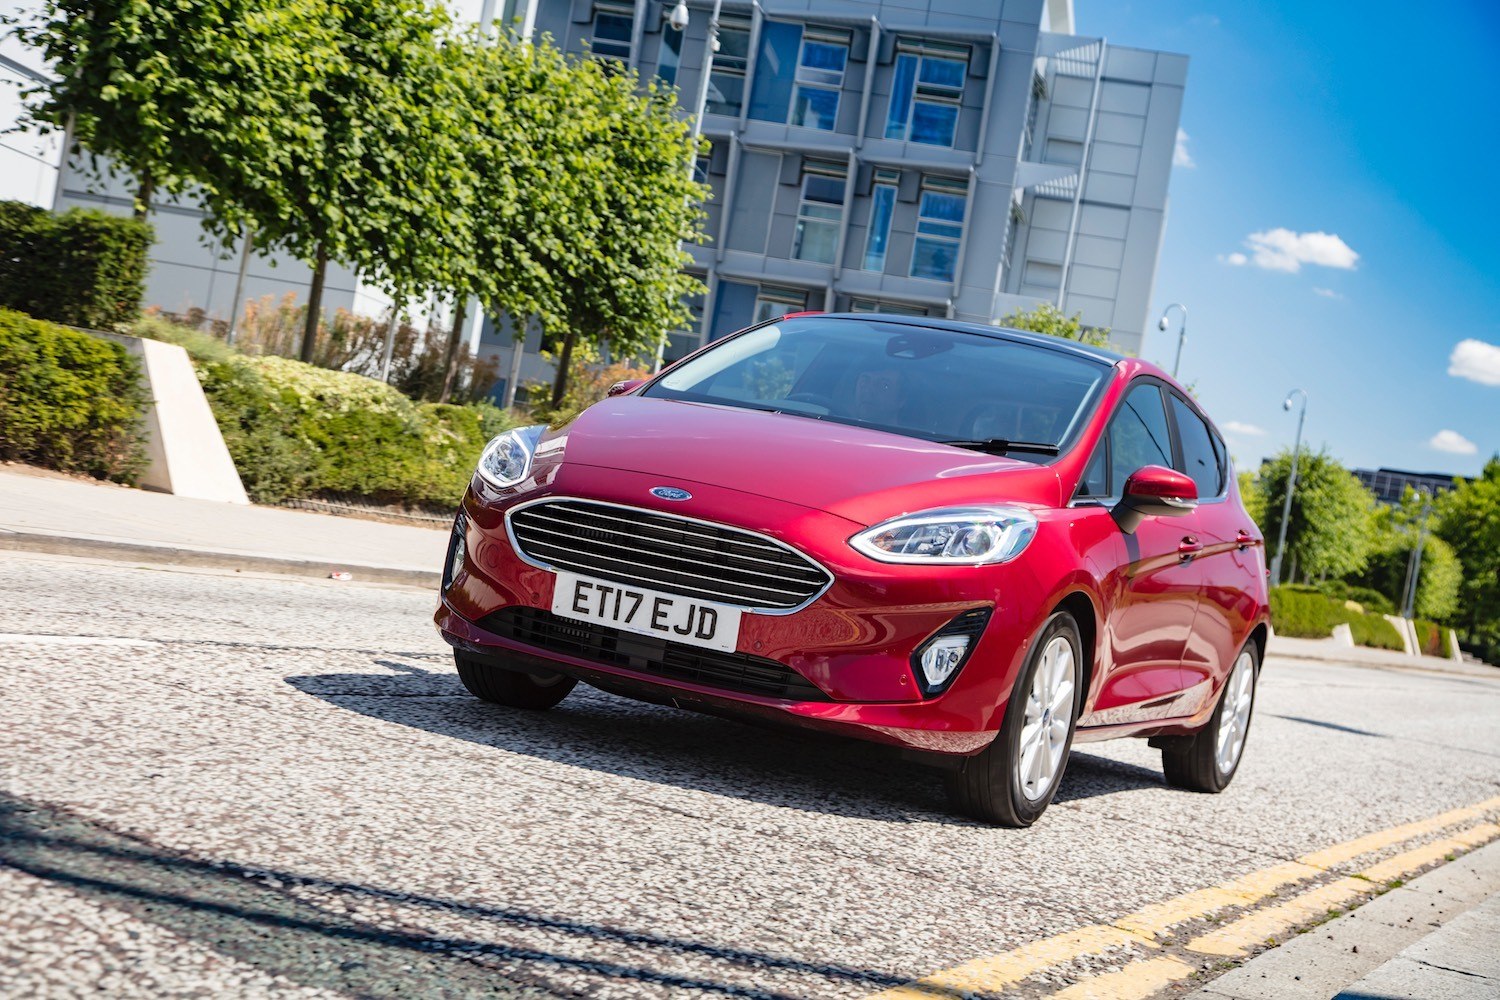 Tom Scanlan reviews the All New Ford Fiesta for Drive 29